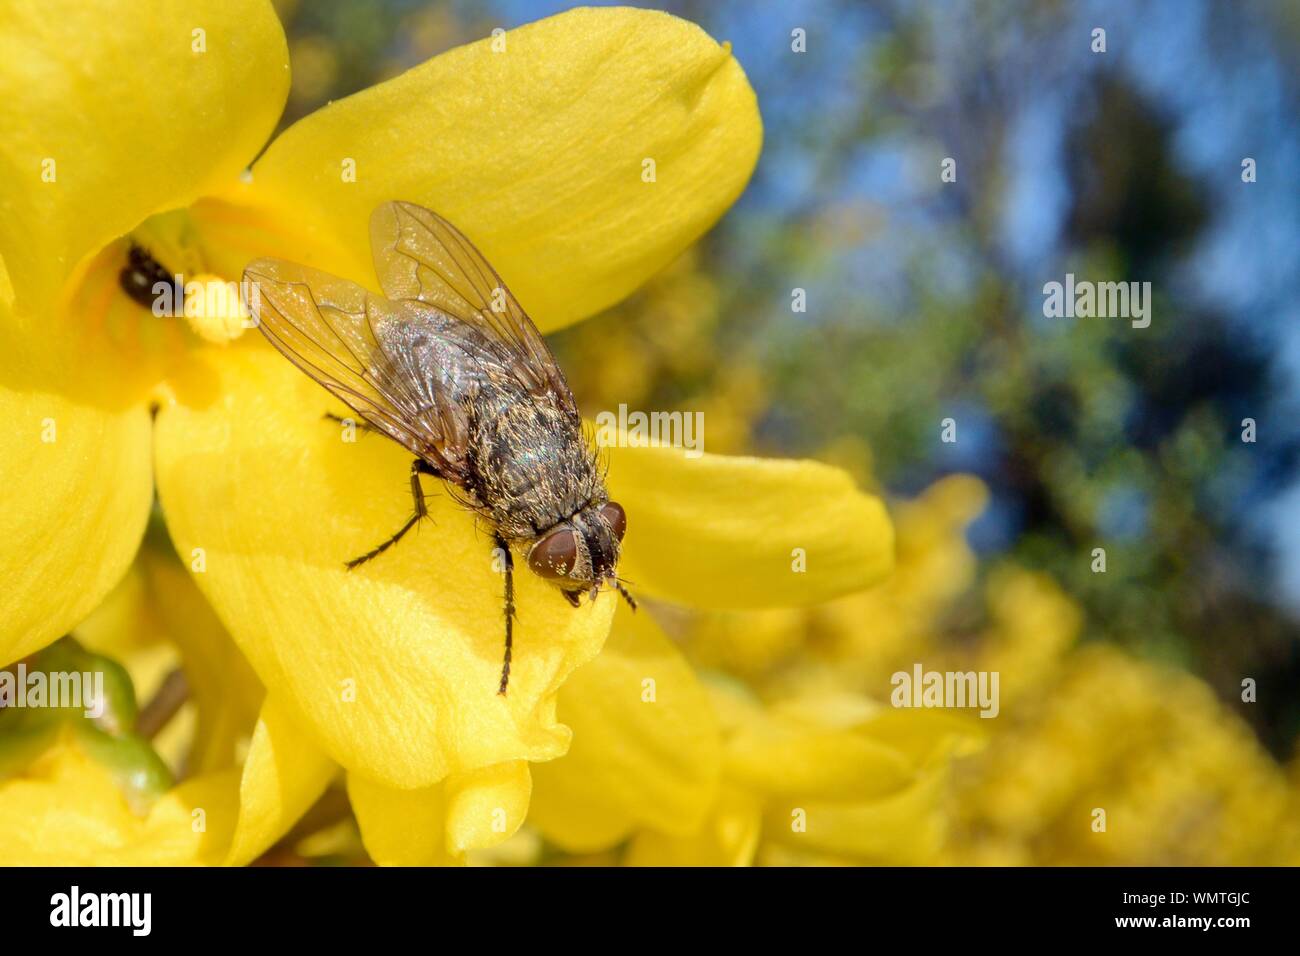 Cluster fly (Pollenia sp.) sunning on a Forsythia flower, Wiltshire garden, UK, March. Stock Photo